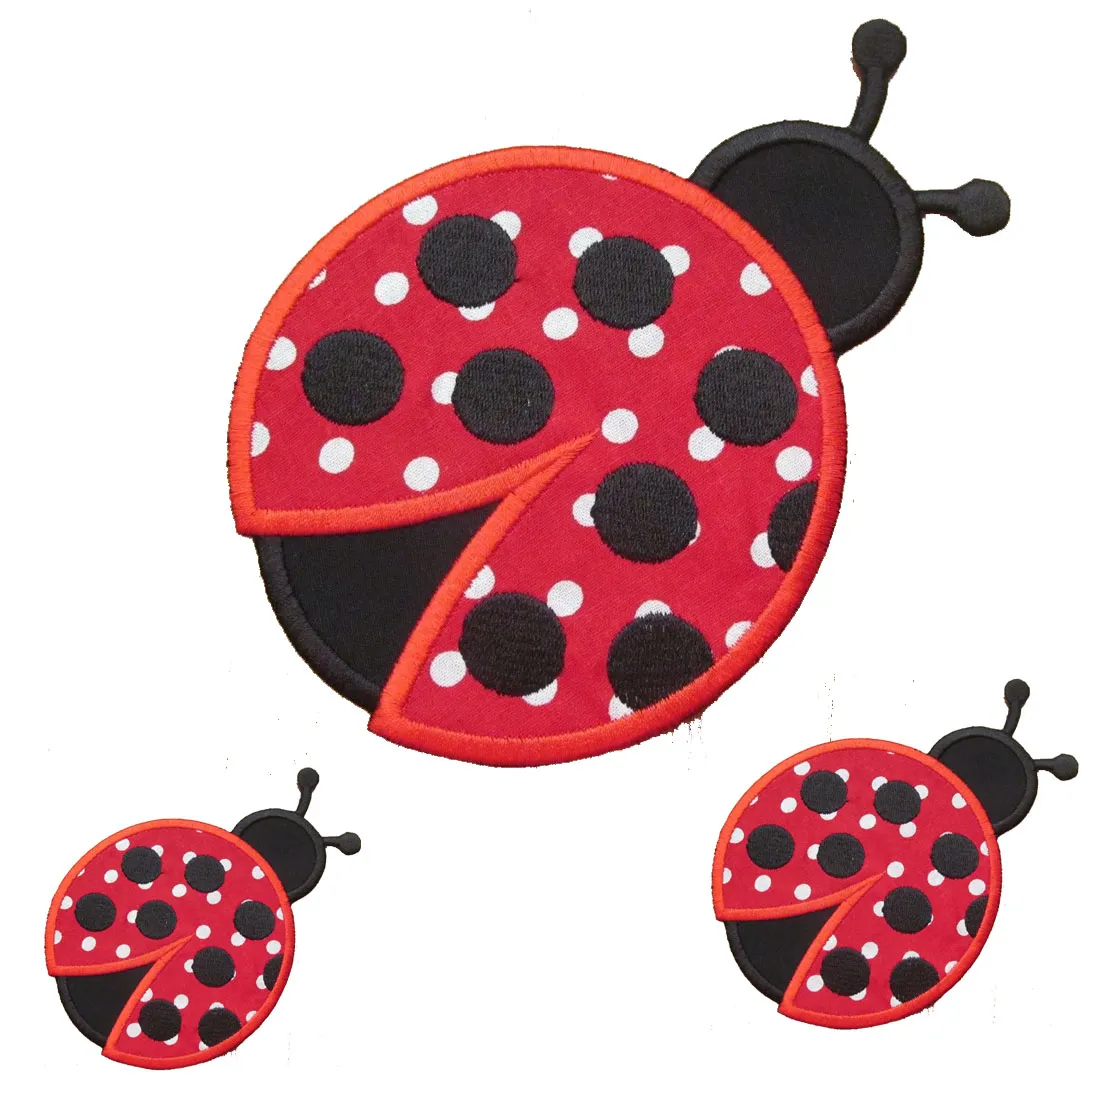 Hot Sale! Custom LADYBUG Animal Iron-On Applique Embroidery Patch 4" MADE IN USA!! Applique